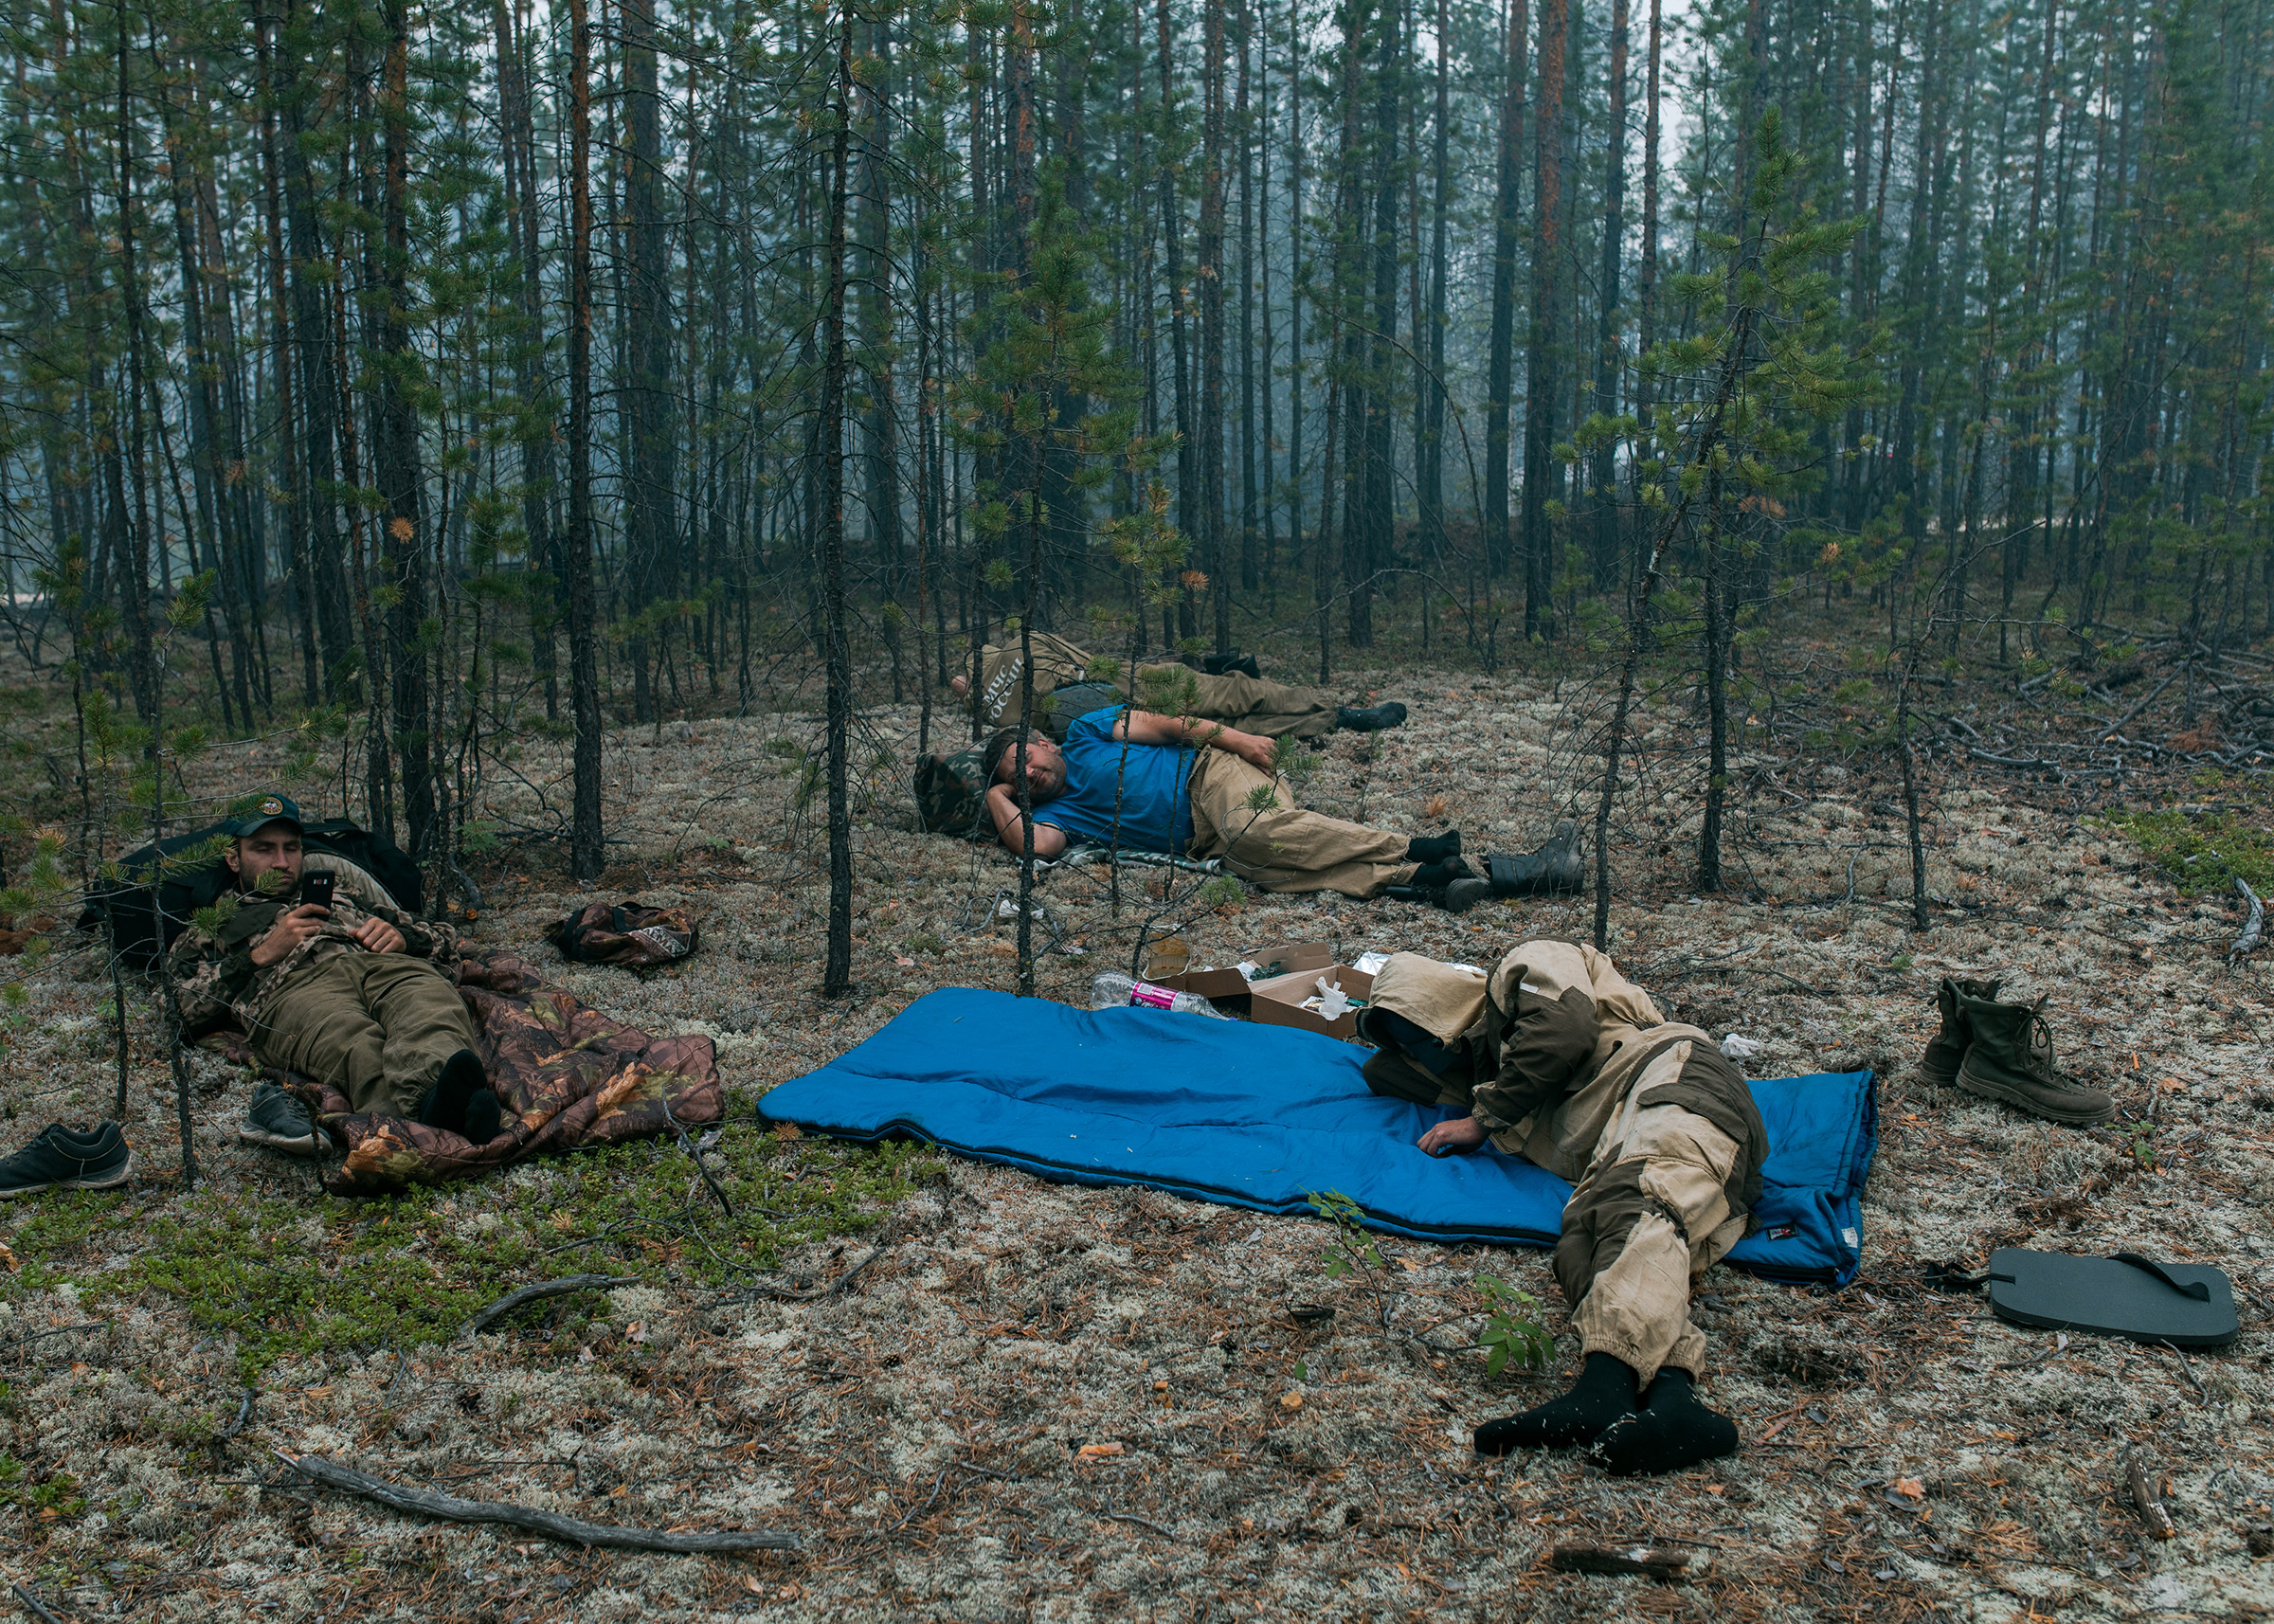 Firefighters of the Ministry of Emergency Situations of the Russian Federation resting after putting out small fires near the village of Dikimdya, on July 15. (Alexey Vasilyev)